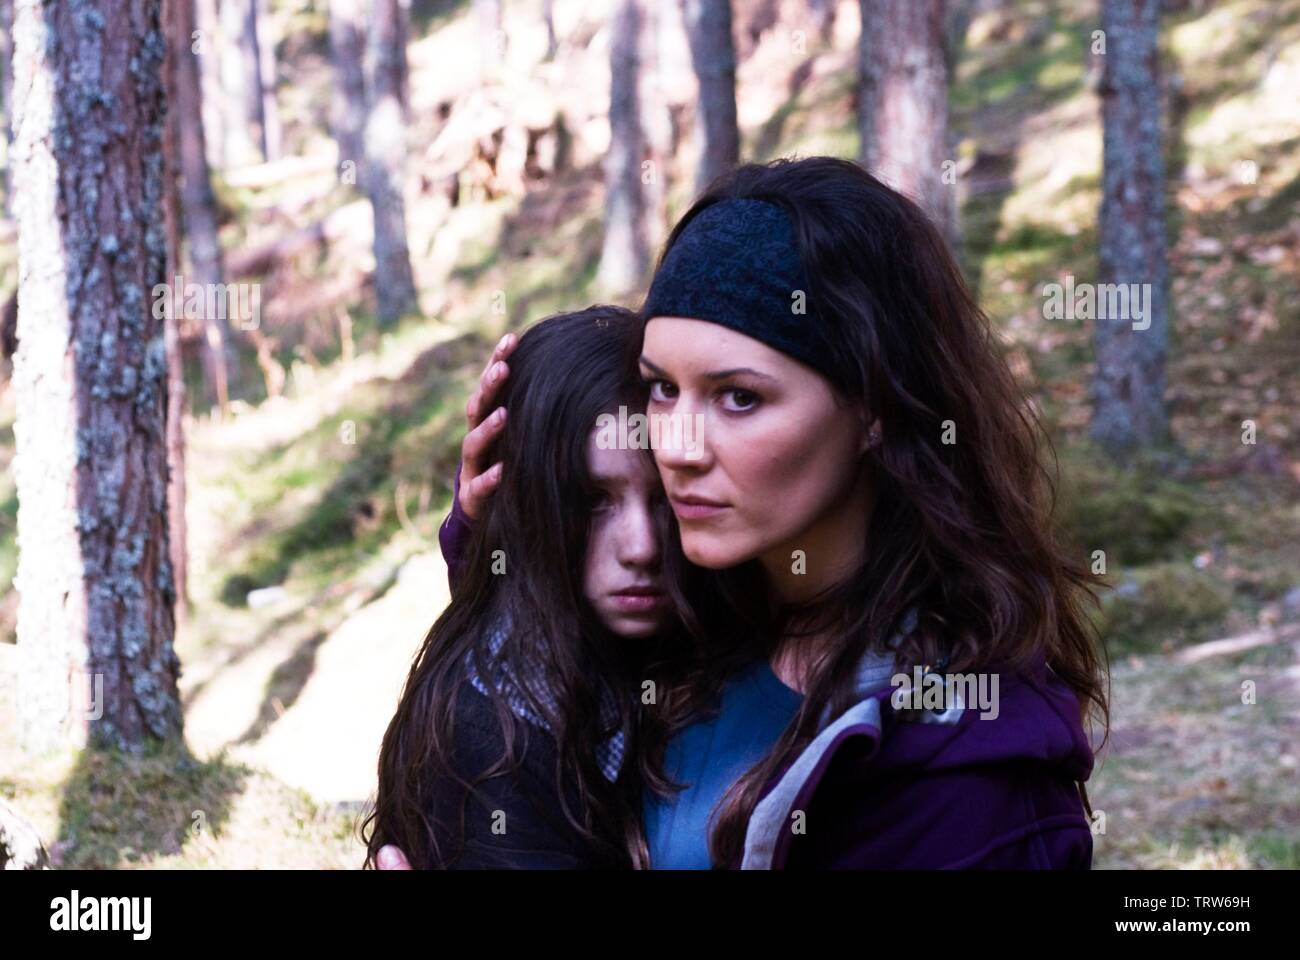 KATE MAGOWAN and HOLLY BOYD in A LONELY PLACE TO DIE (2011). Copyright: Editorial use only. No merchandising or book covers. This is a publicly distributed handout. Access rights only, no license of copyright provided. Only to be reproduced in conjunction with promotion of this film. Credit: CARNABY INTERNATIONAL / Album Stock Photo